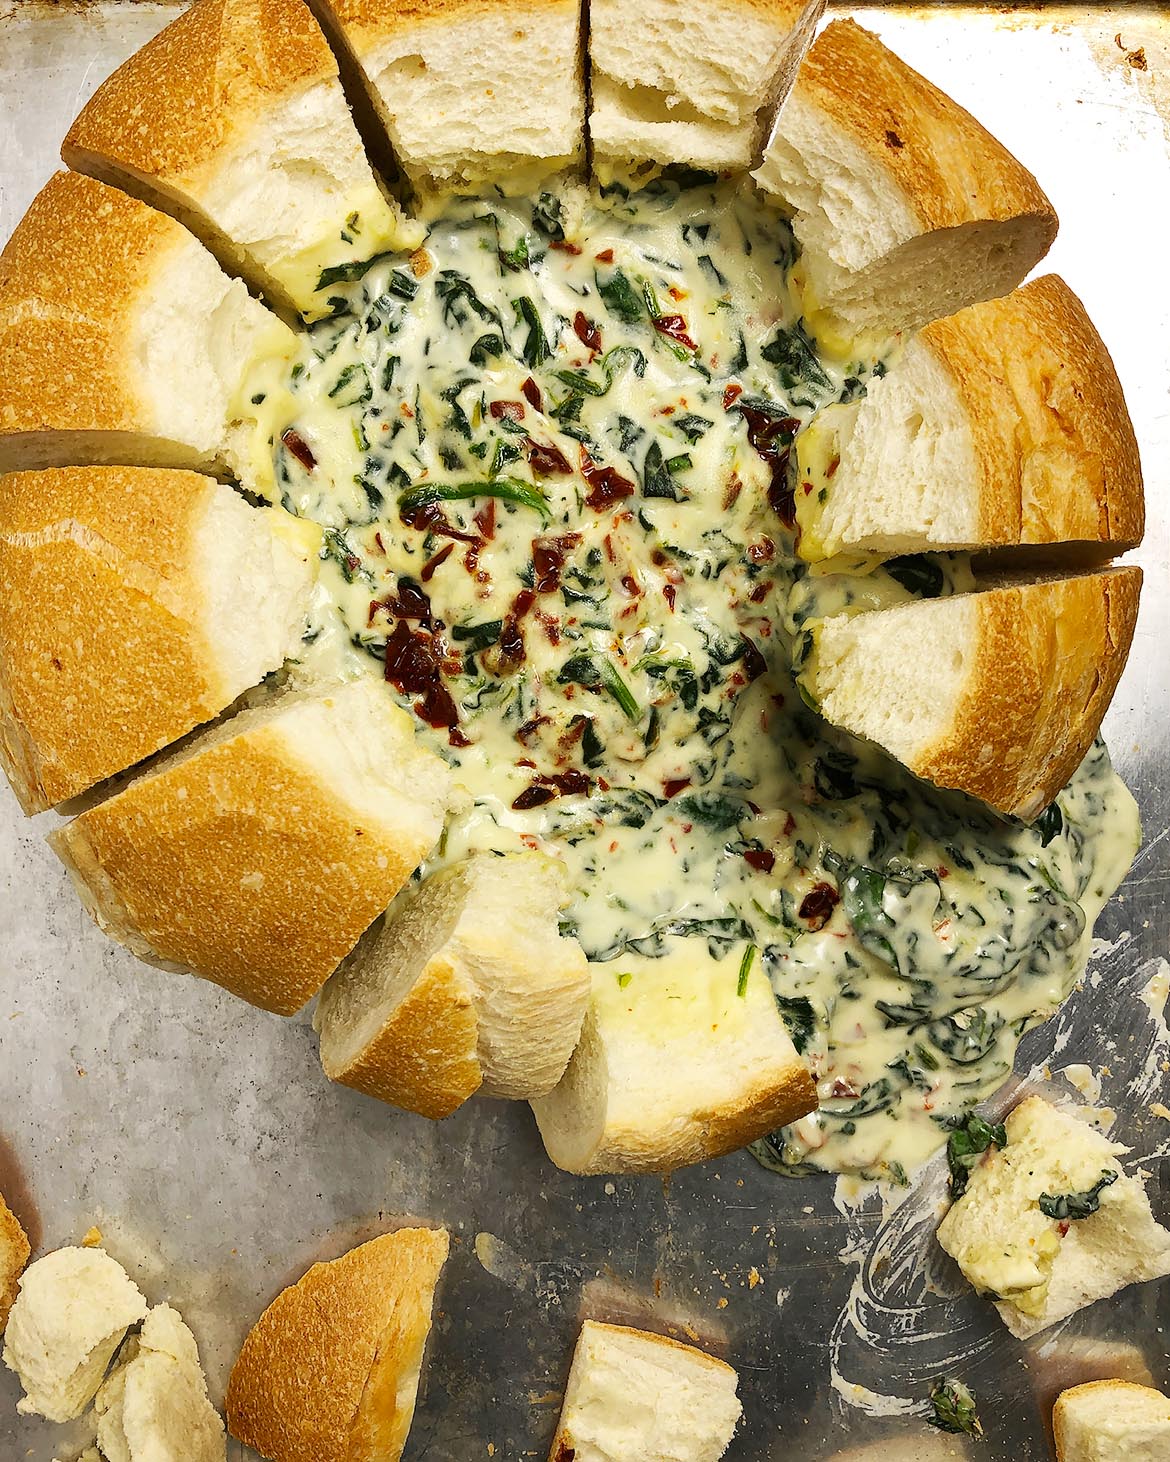 Top-down view of spinach dip in bread bowl, with cubes of bread pulled out of bowl